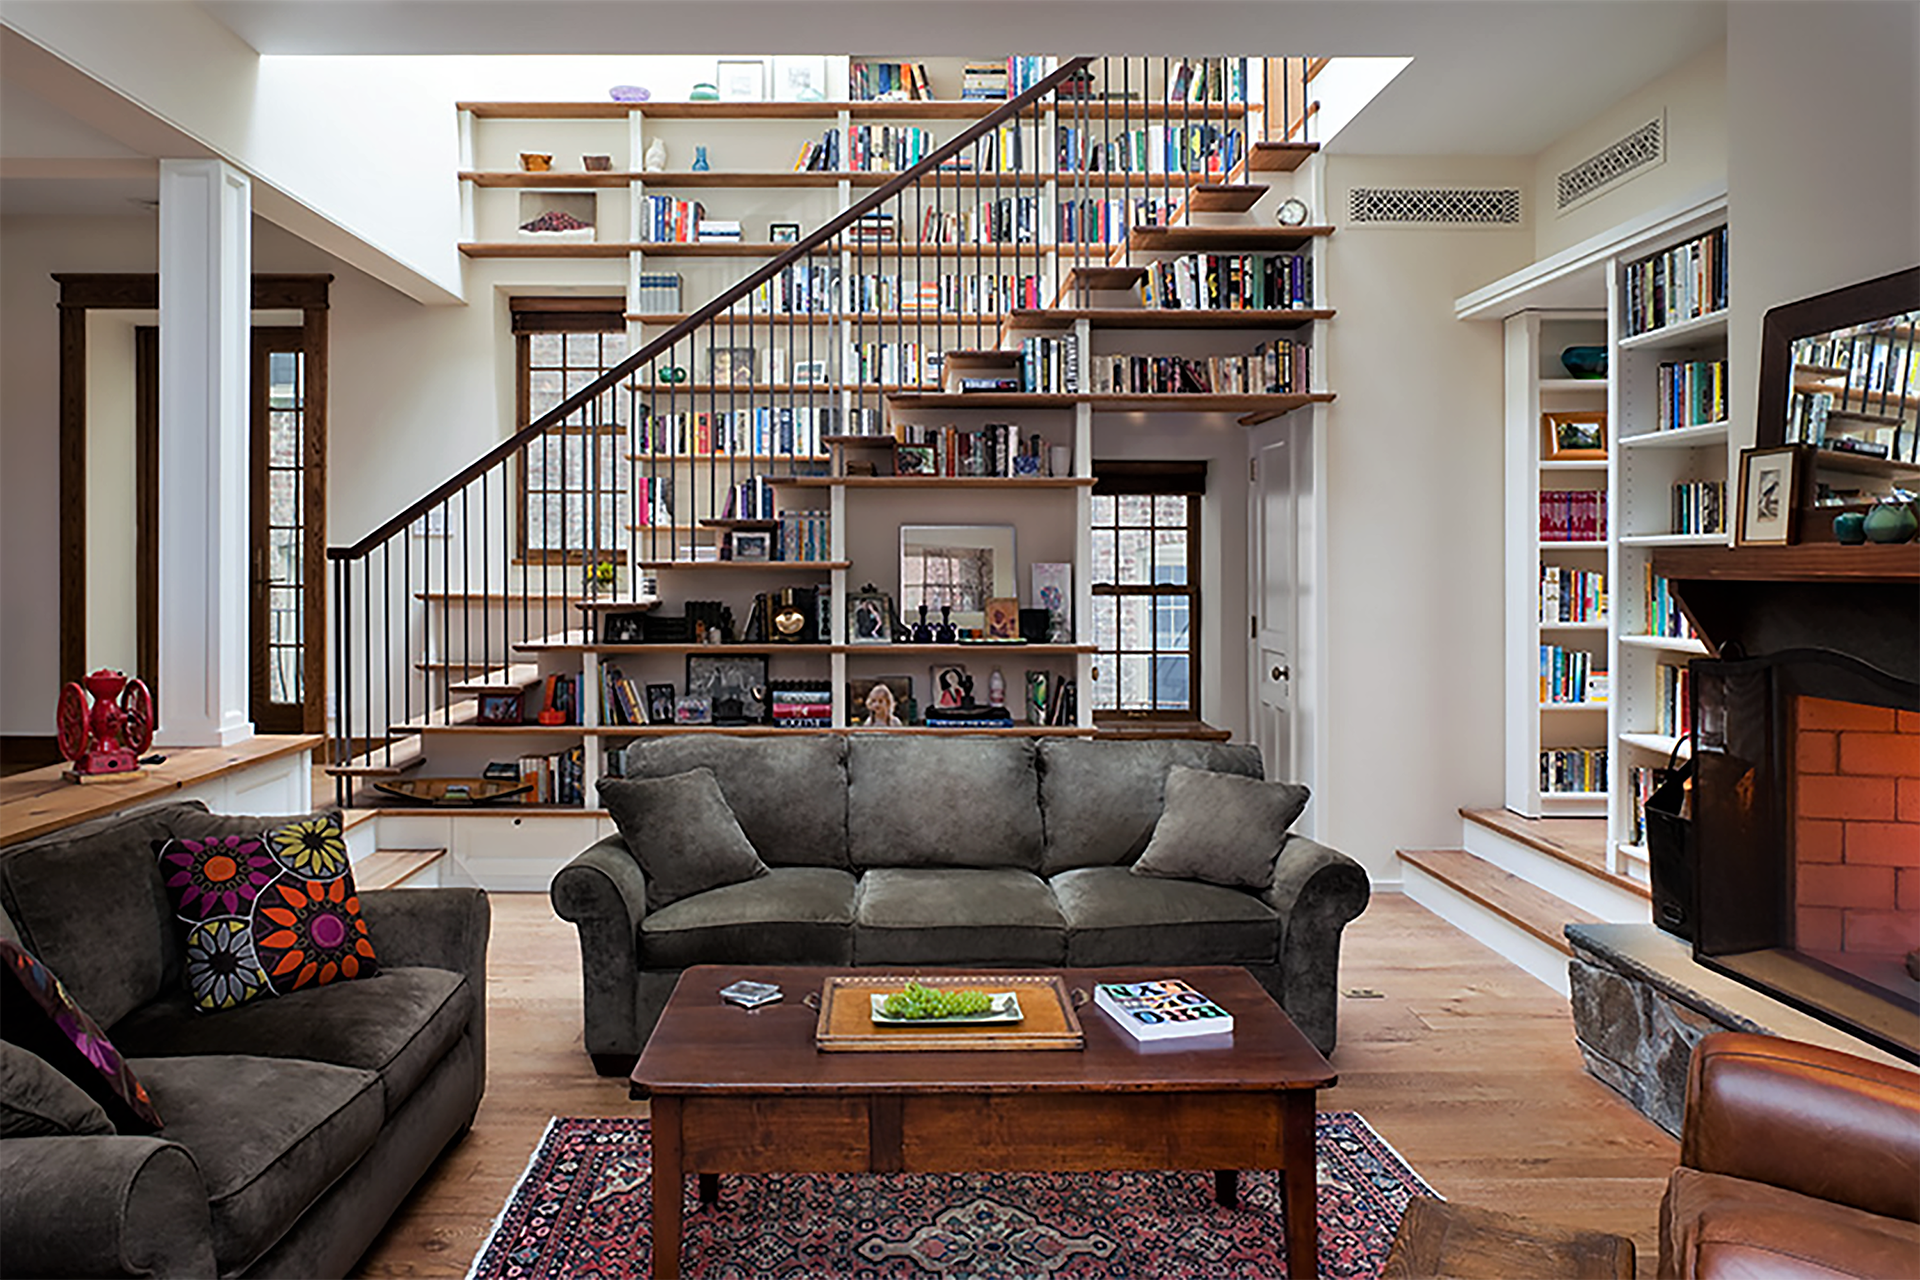 Living room of a Brooklyn Heights carriage house. The staircase leading to the second floor is lined with wood bookshelves on both sides.